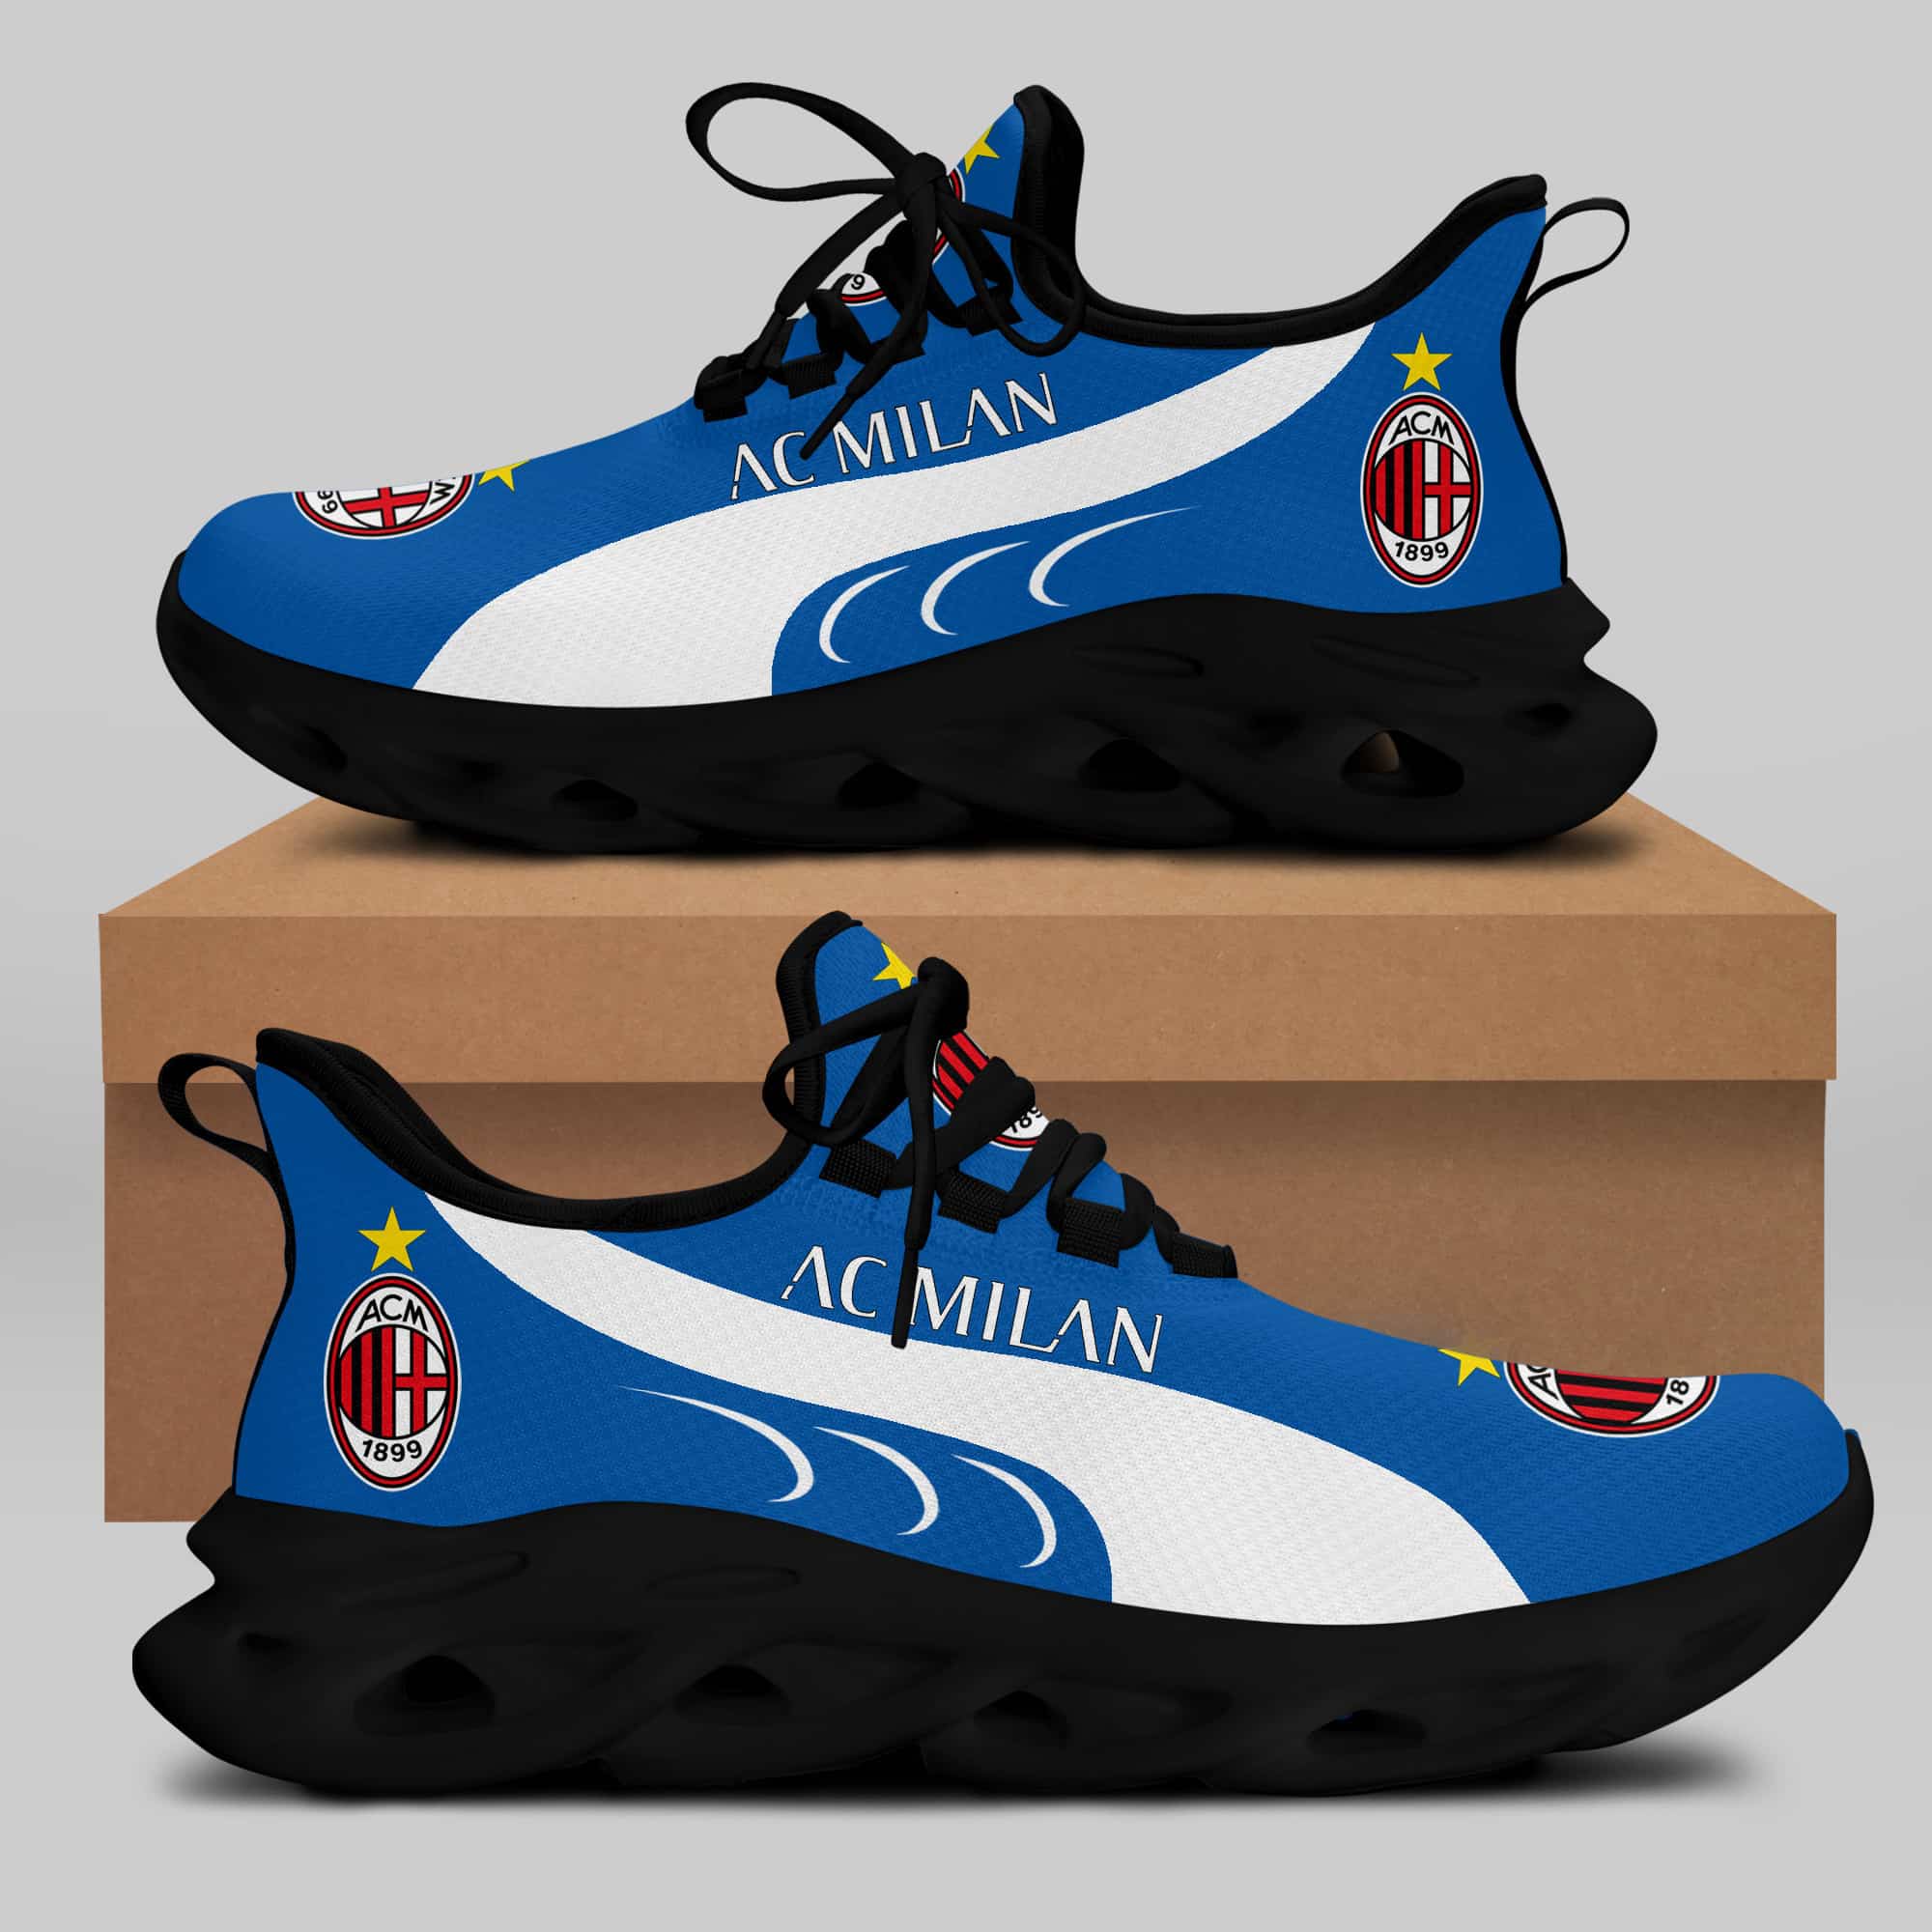 Ac Milan Running Shoes Max Soul Shoes Sneakers Ver 5 1